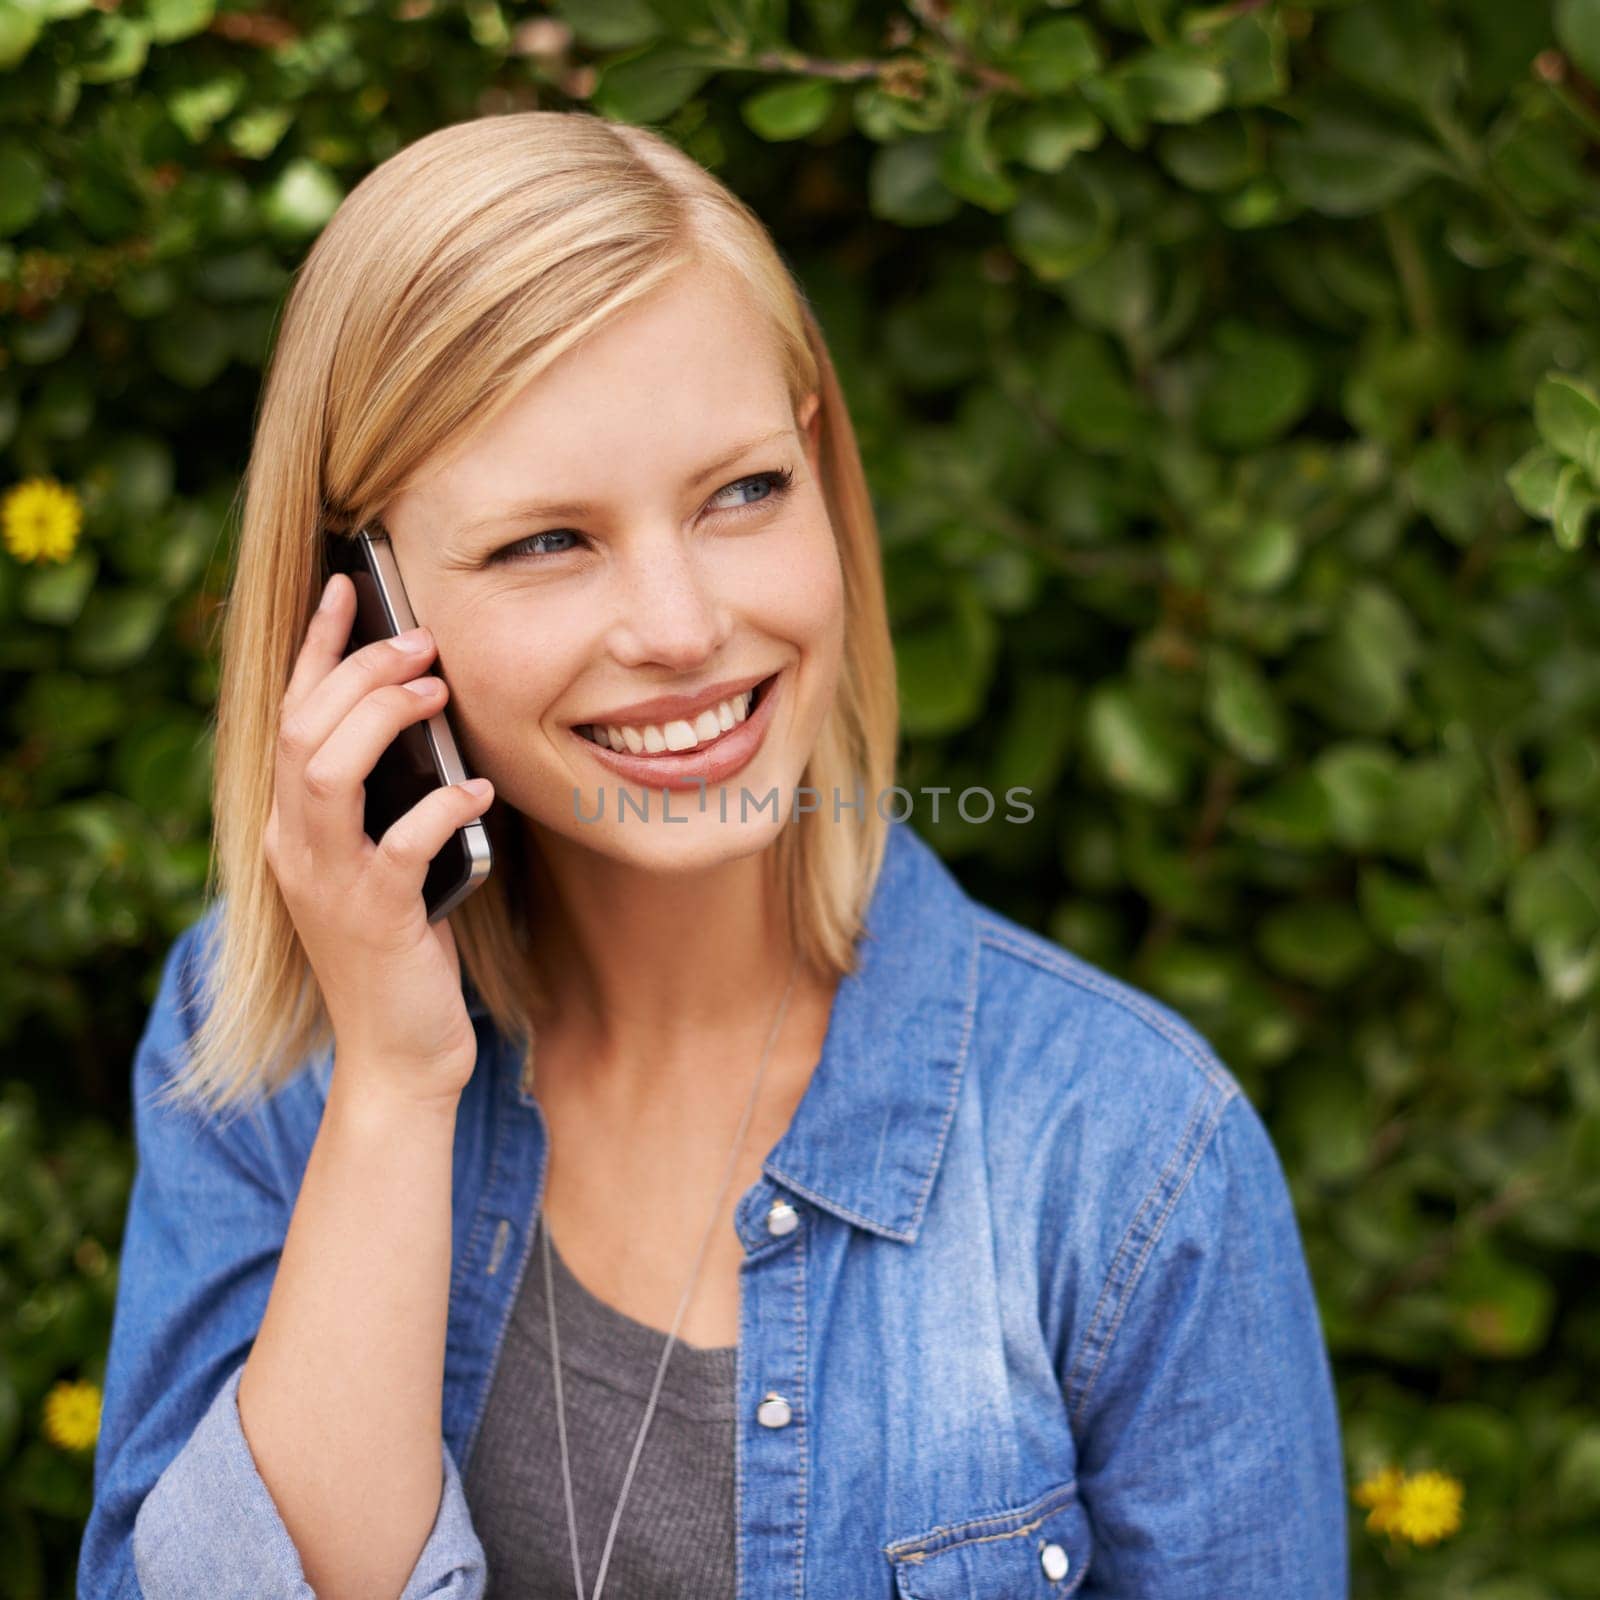 Phone call, smile and happy woman relax in a park with online conversation, listening or chat. Smartphone, hello or lady person in nature with web communication for taxi, chauffeur or commute service.